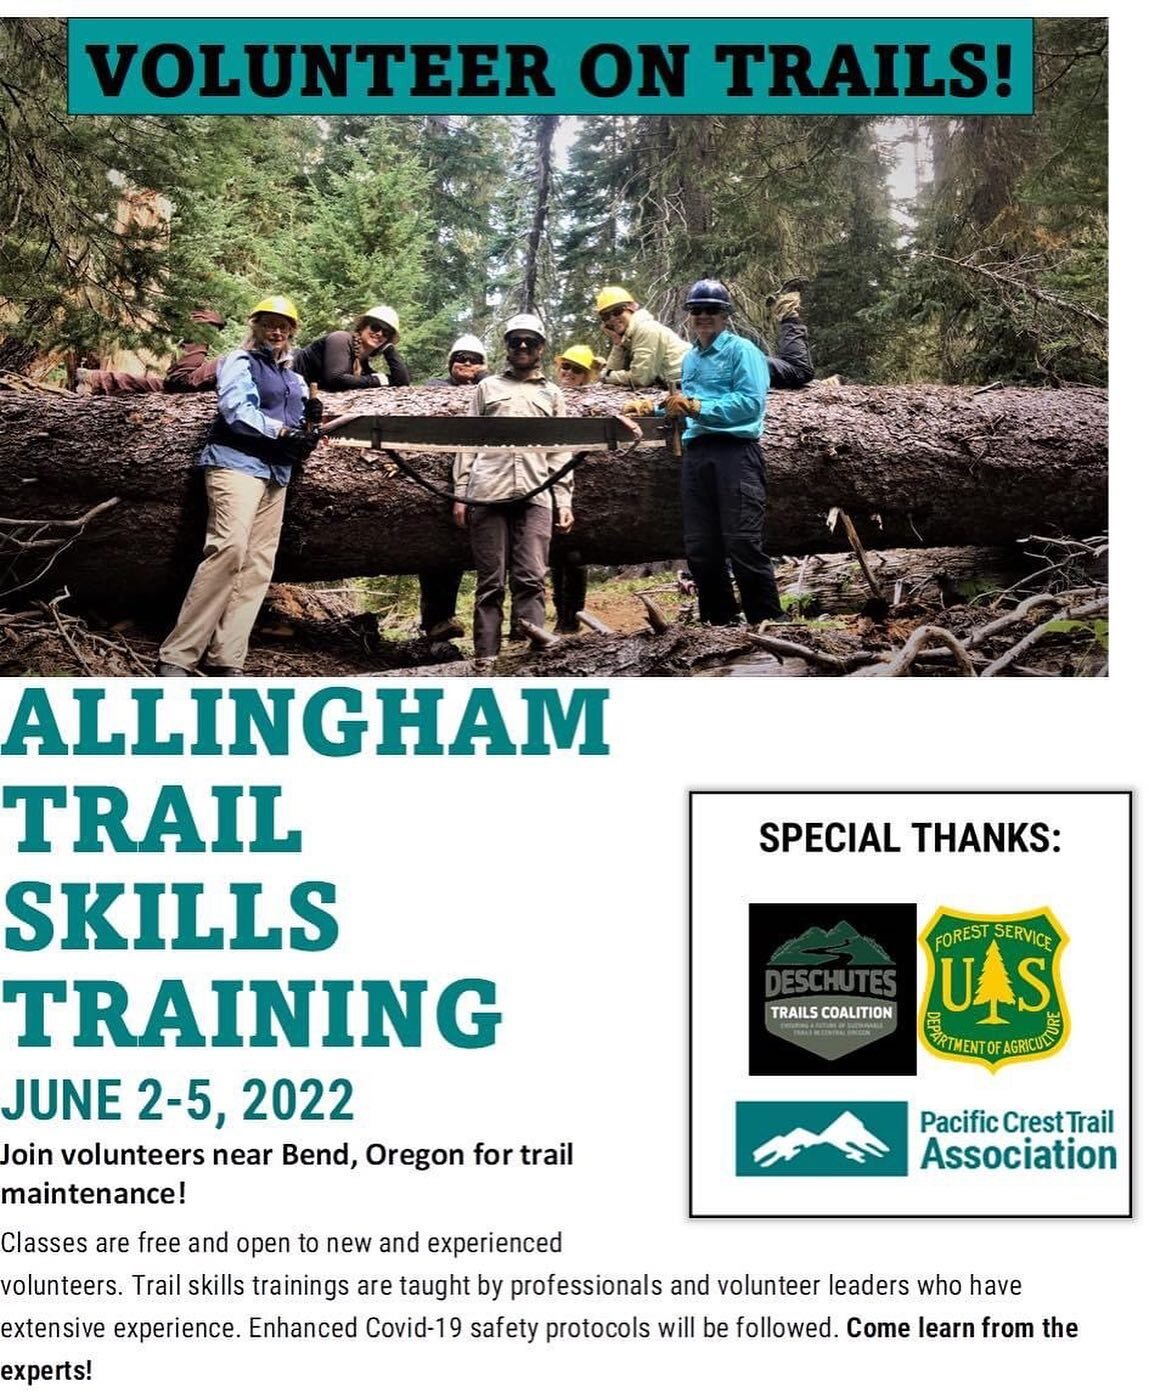 Come learn from the experts!

Details and registration links can be found here: Allingham Trail Skills College - Pacific Crest Trail Association https://www.pcta.org/volunteer/trail-skills-college/allingham/